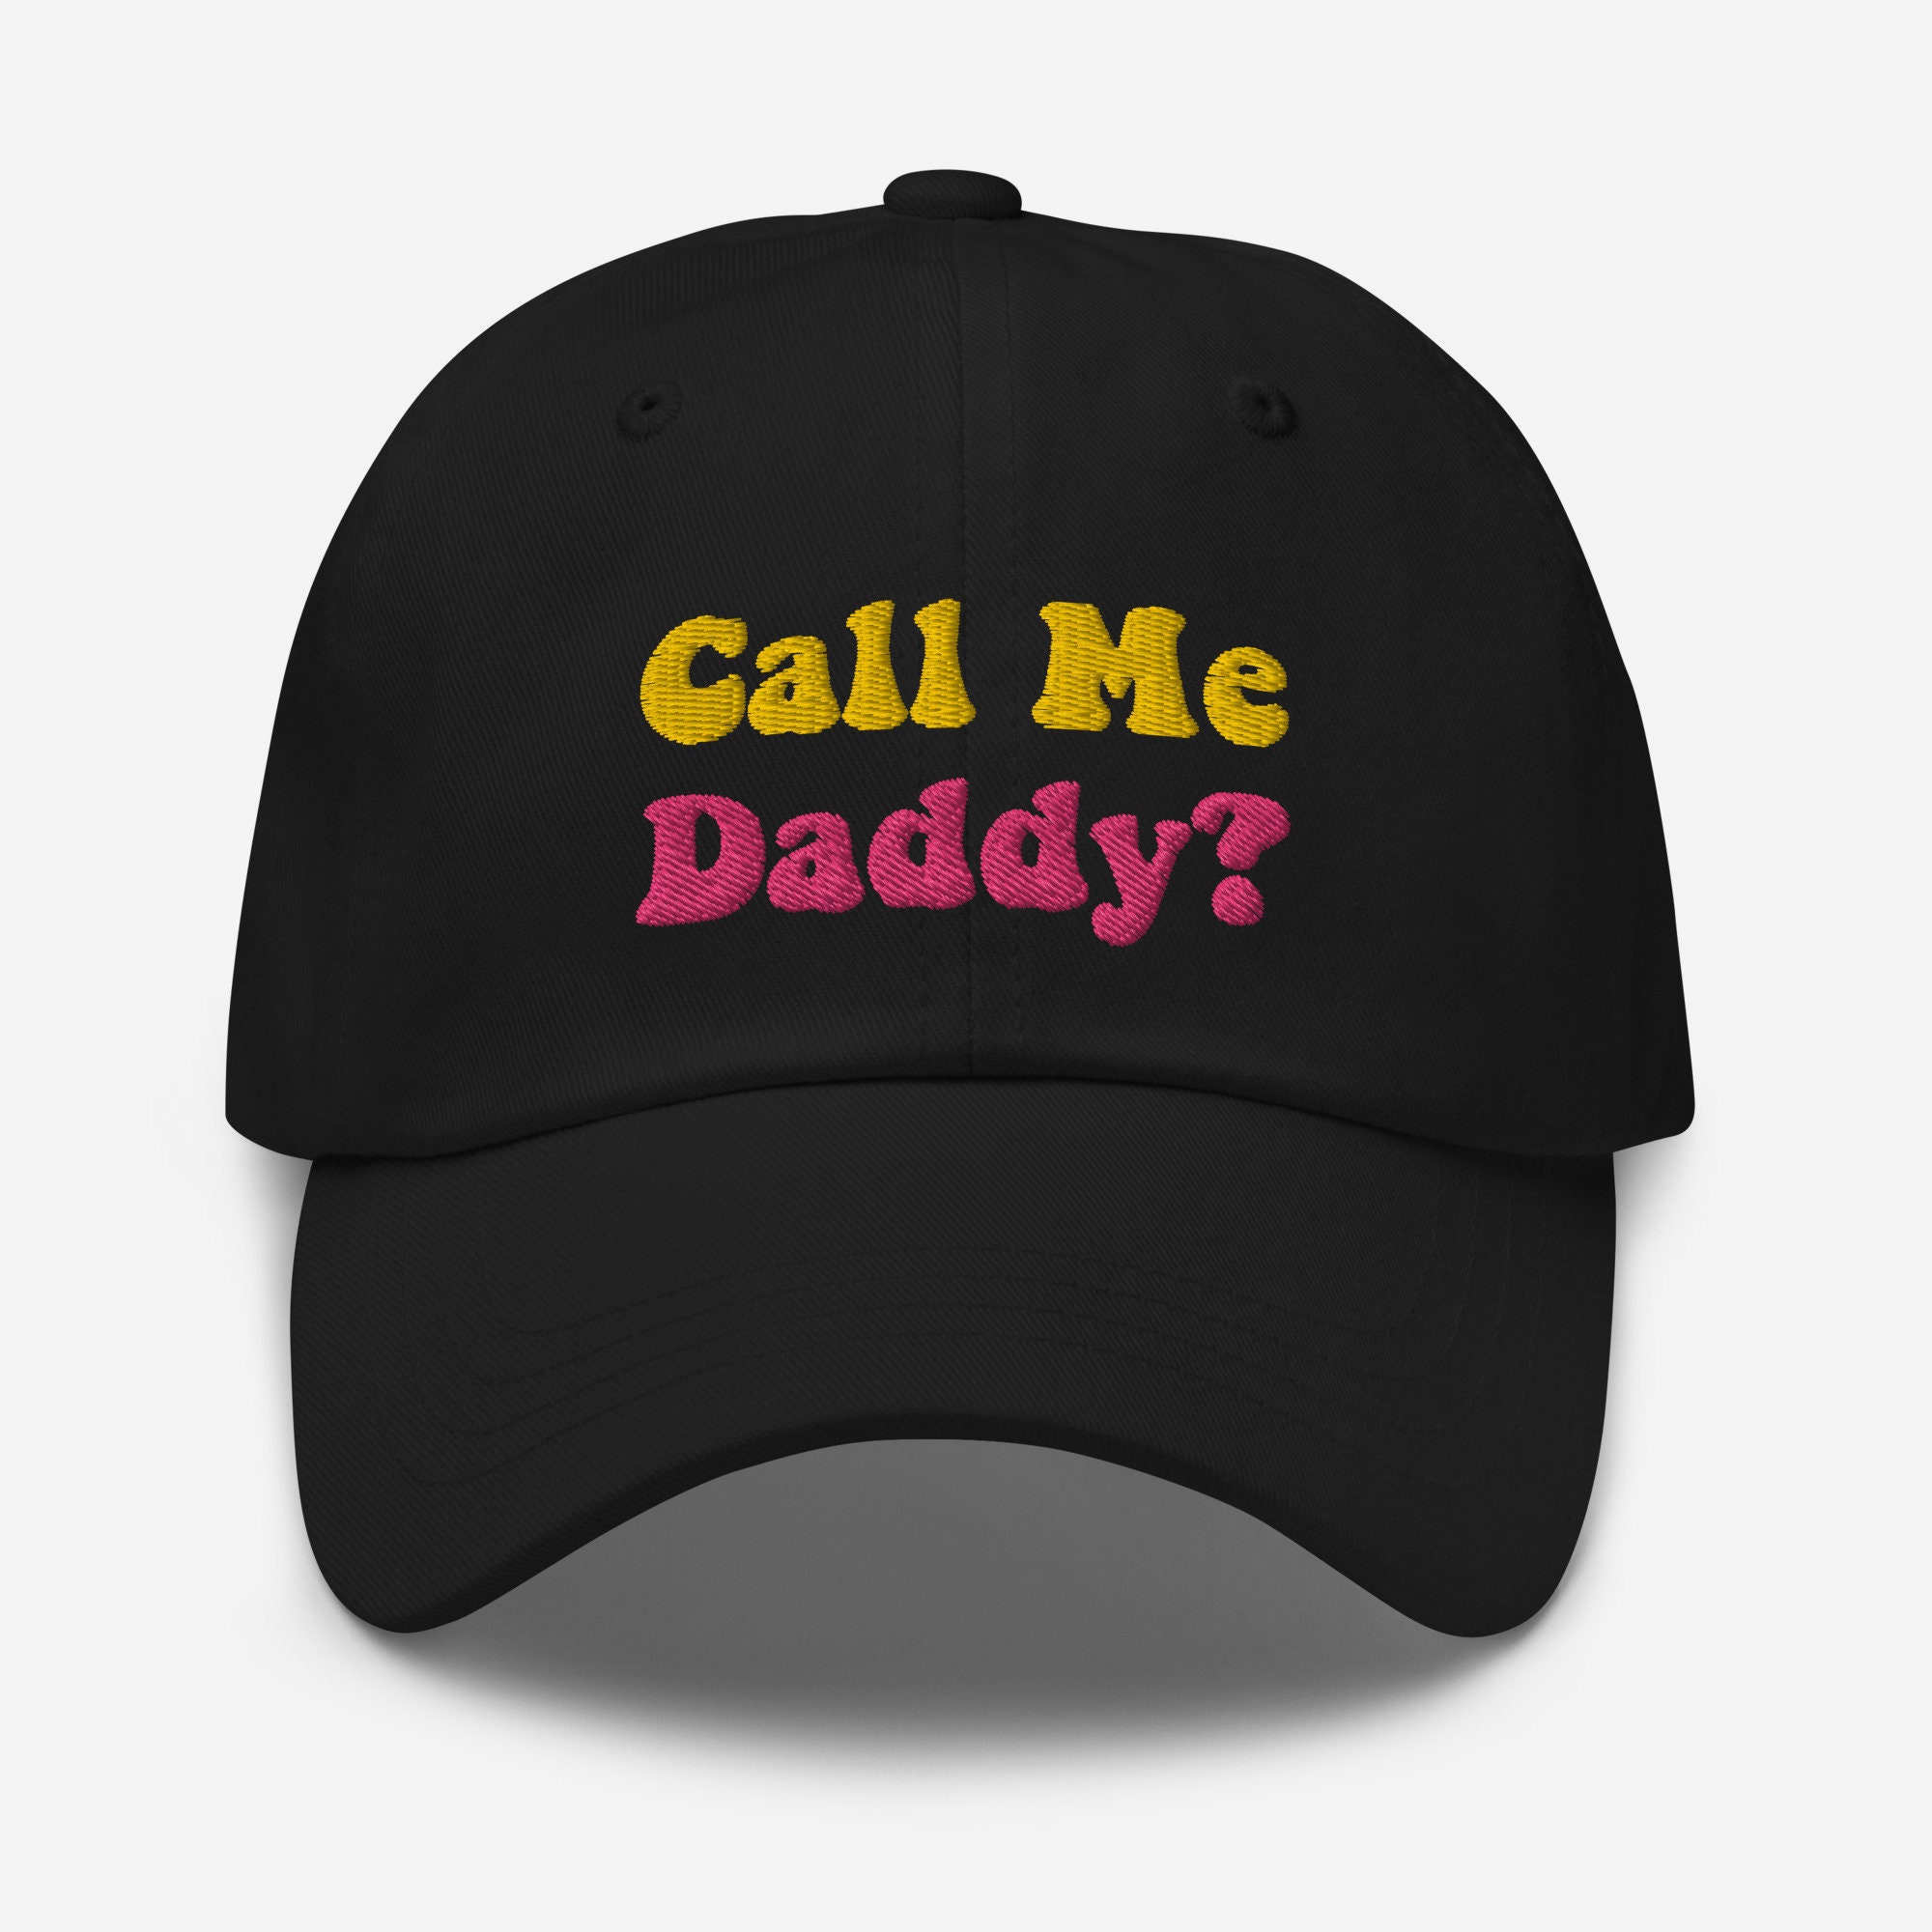 Call Me Daddy